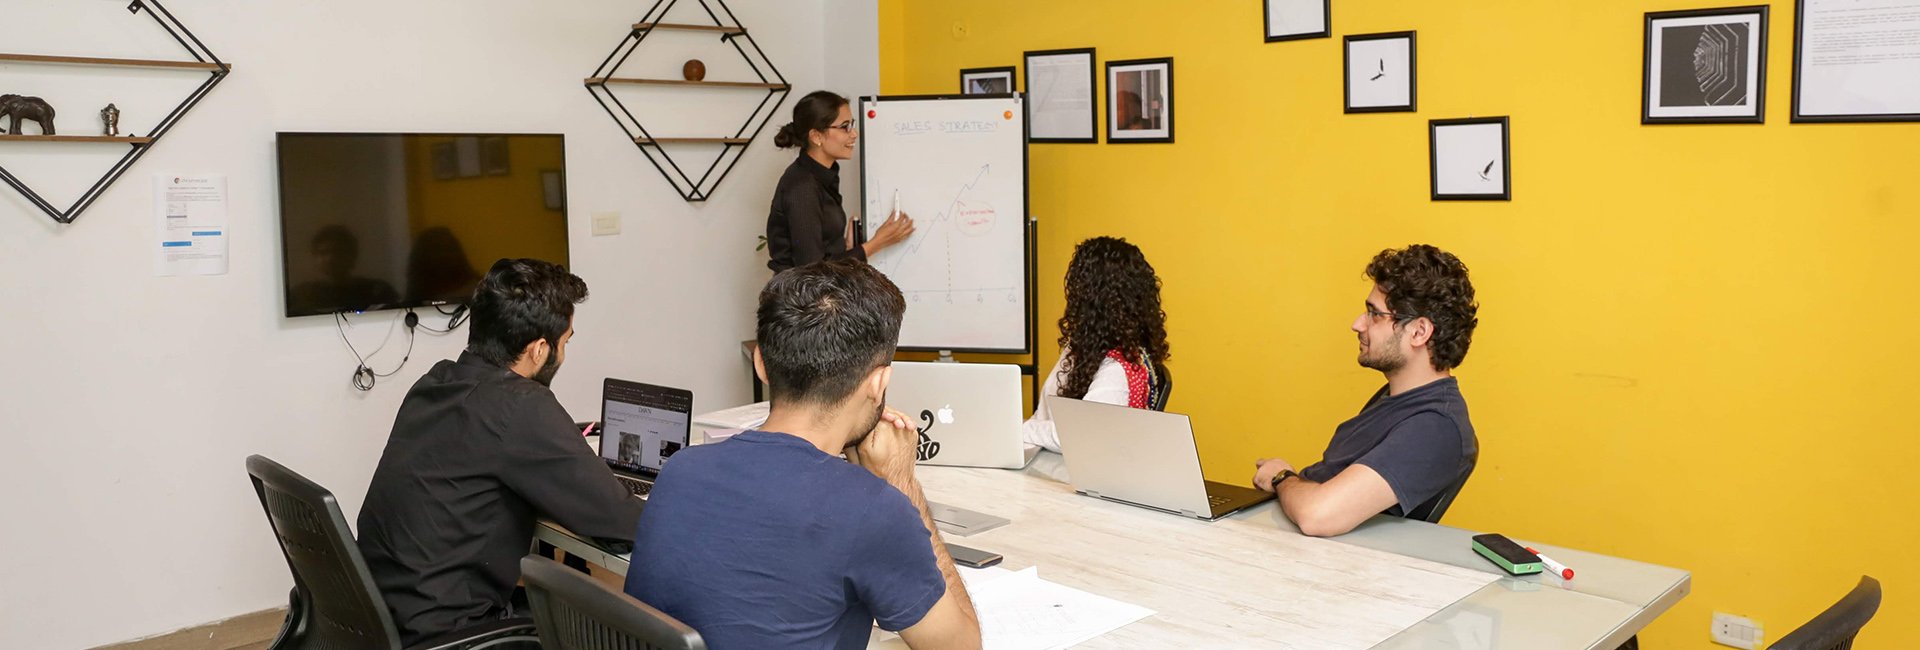 Kickstart coworking space provides the best meeting room at the most affordable price